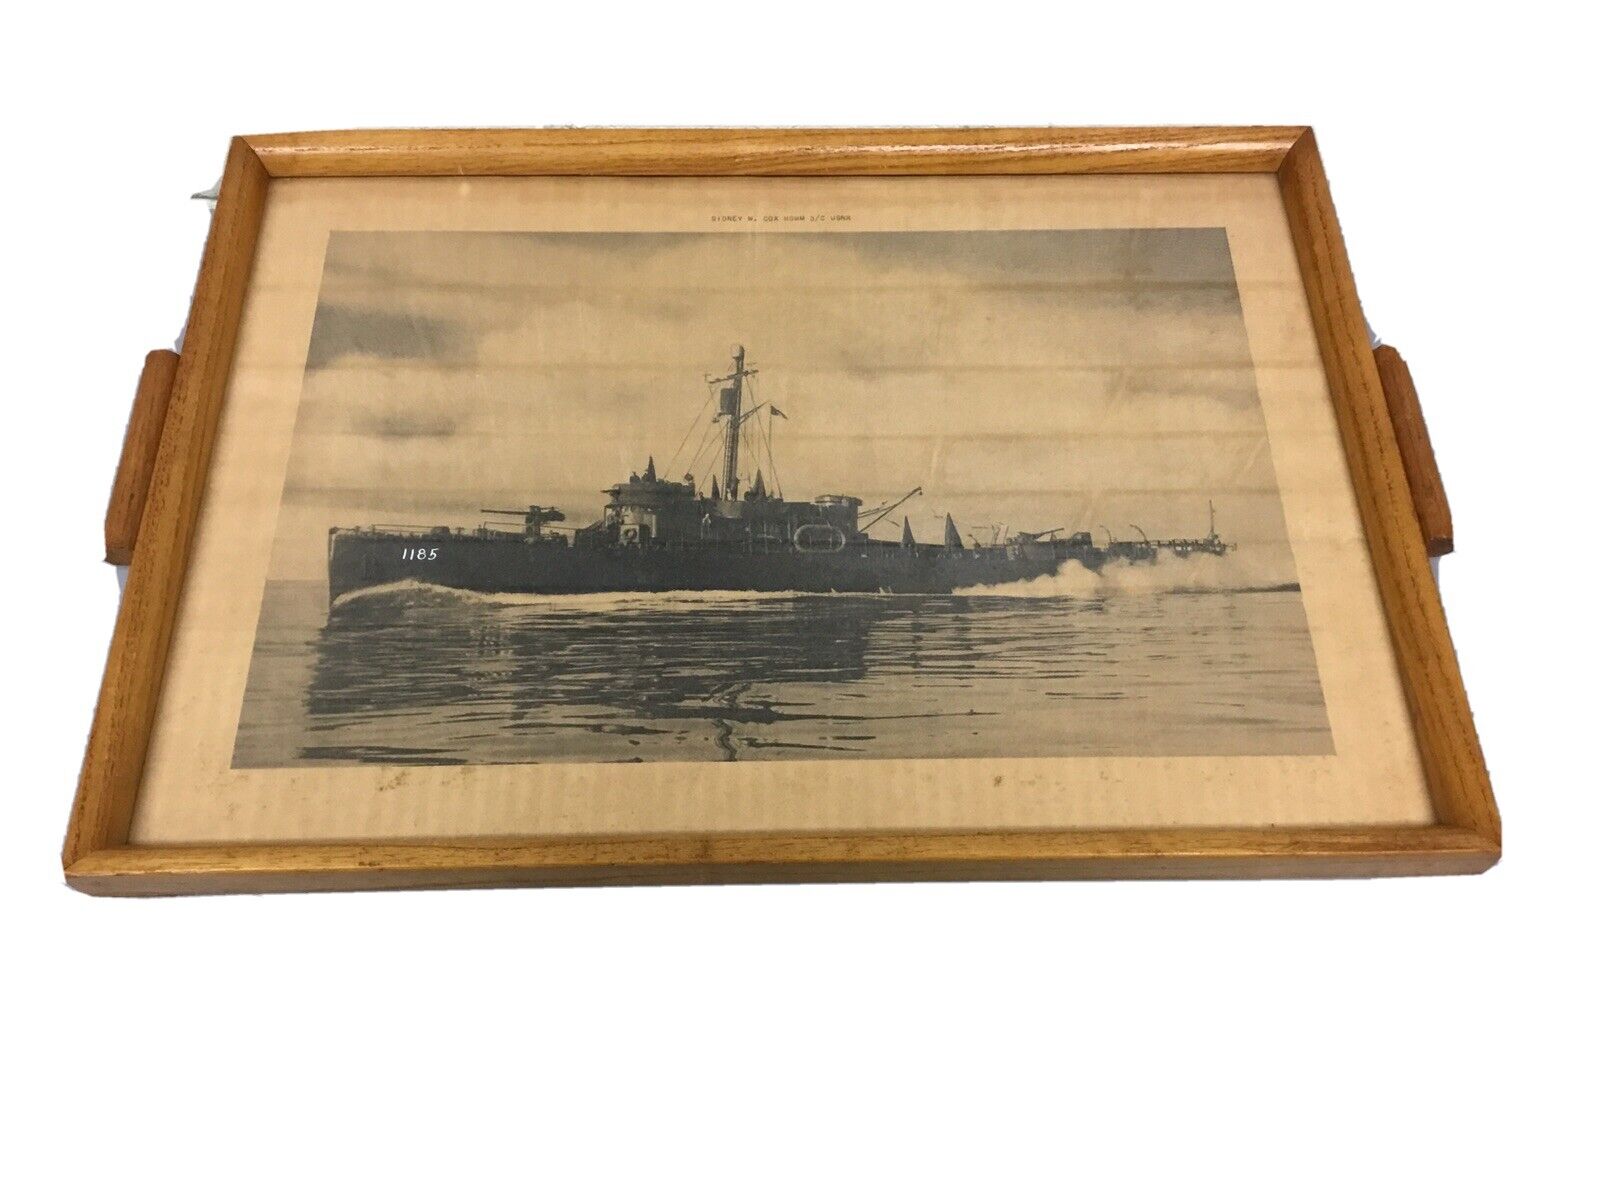 ANTIQUE VTG MCM WOOD SERVING TRAY WITH PIC US NAVAL RESERVE SHIP SIDNEY COX     